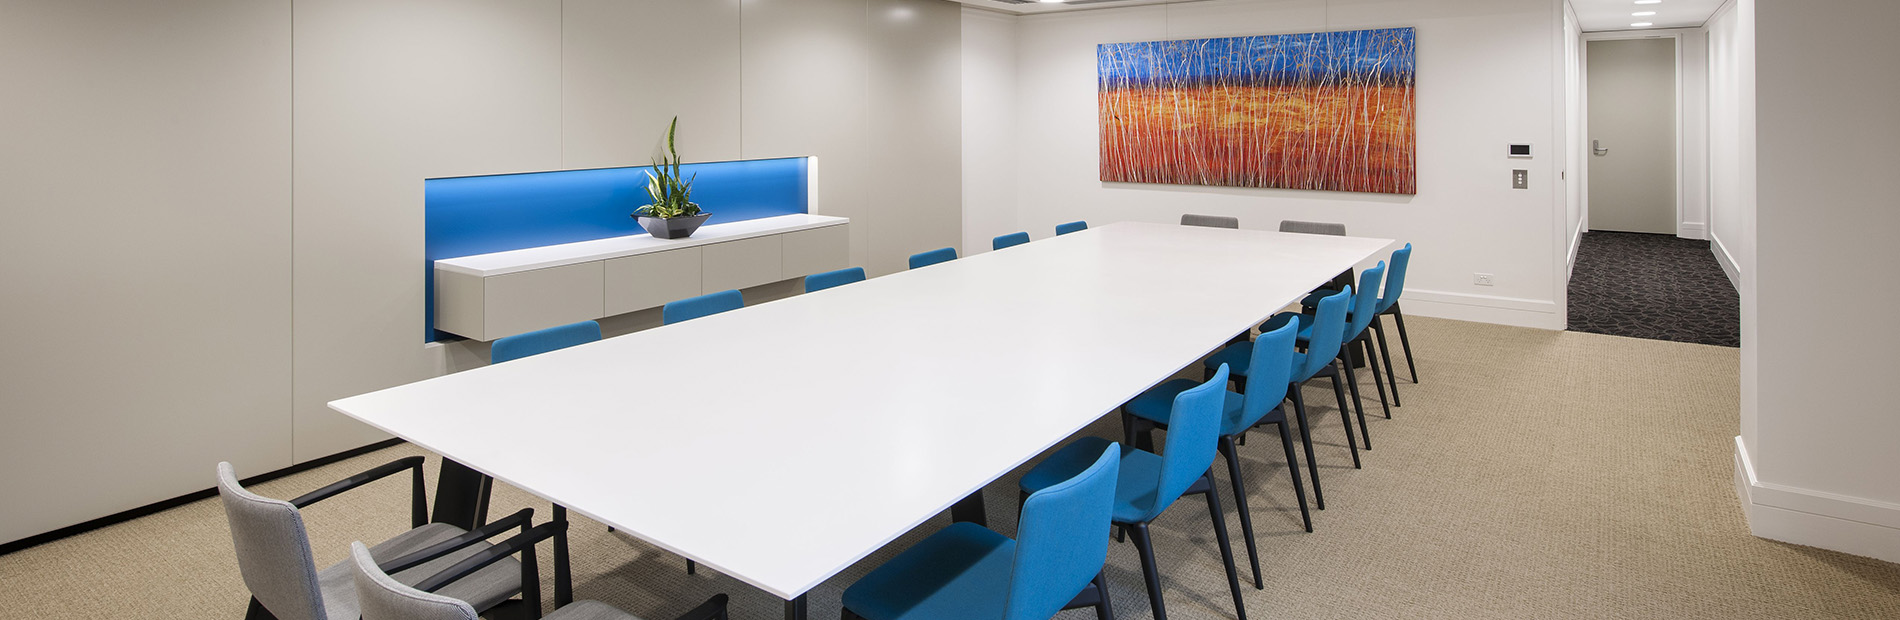 Corporate Boardroom Desihgned by Hodgkison Architects